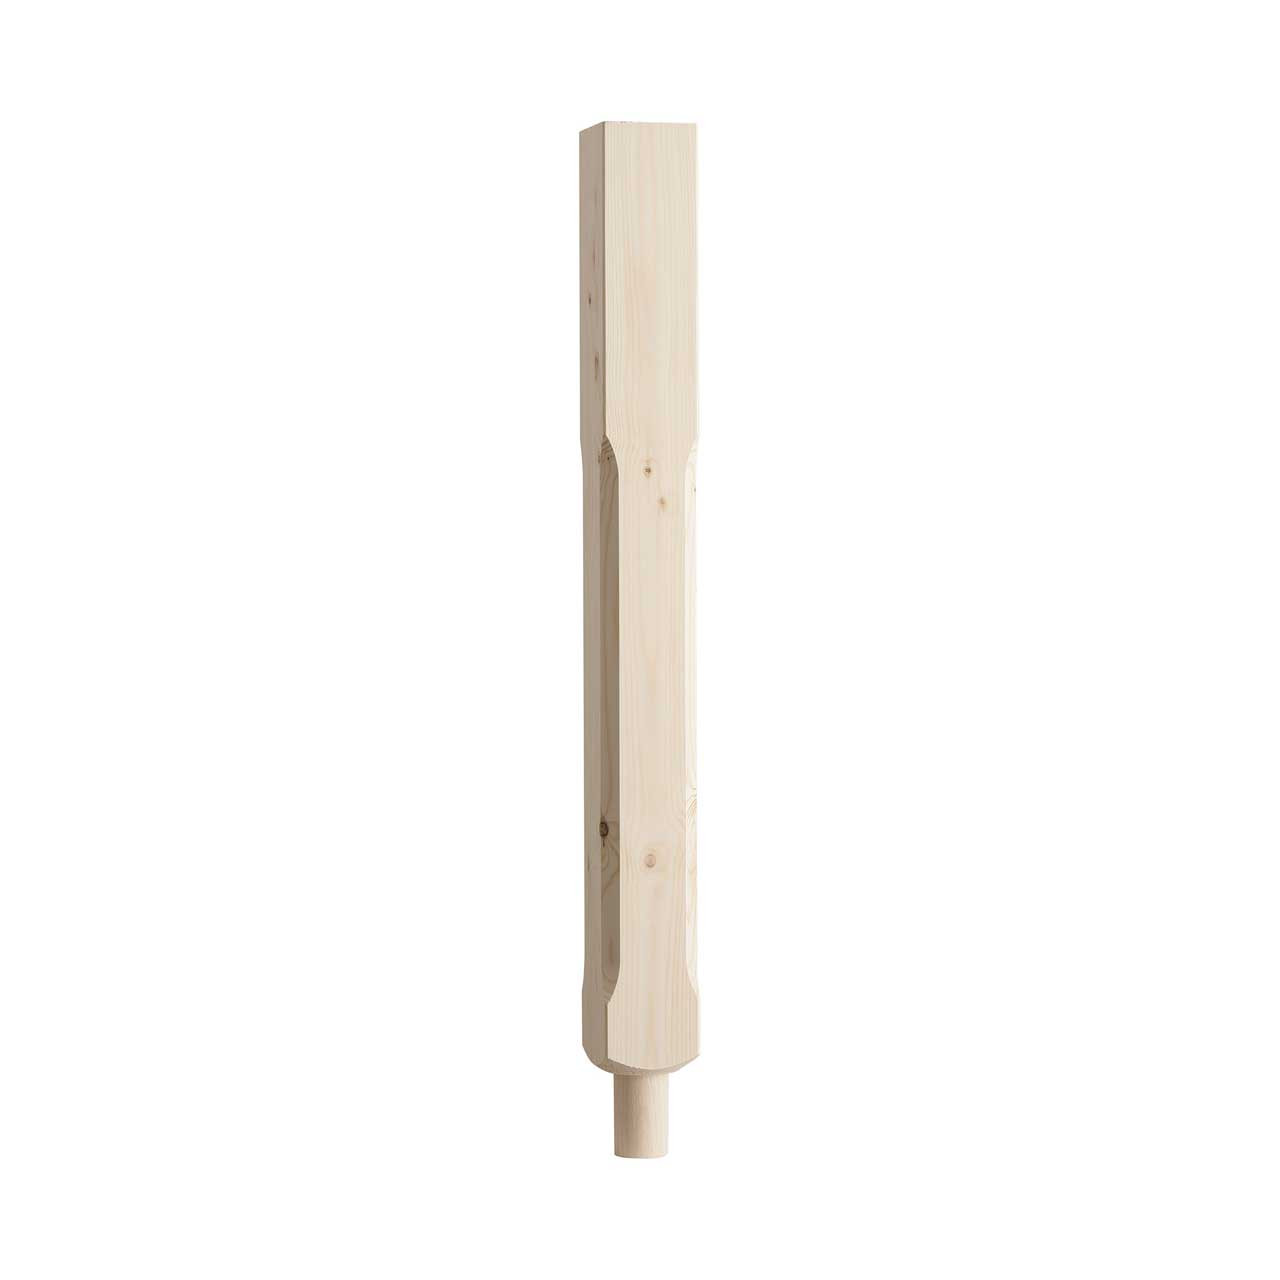 Photograph of Cheshire Mouldings 91mm x 91mm x 850mm Pine Decking Stop Chamfered Newel Spigot Post